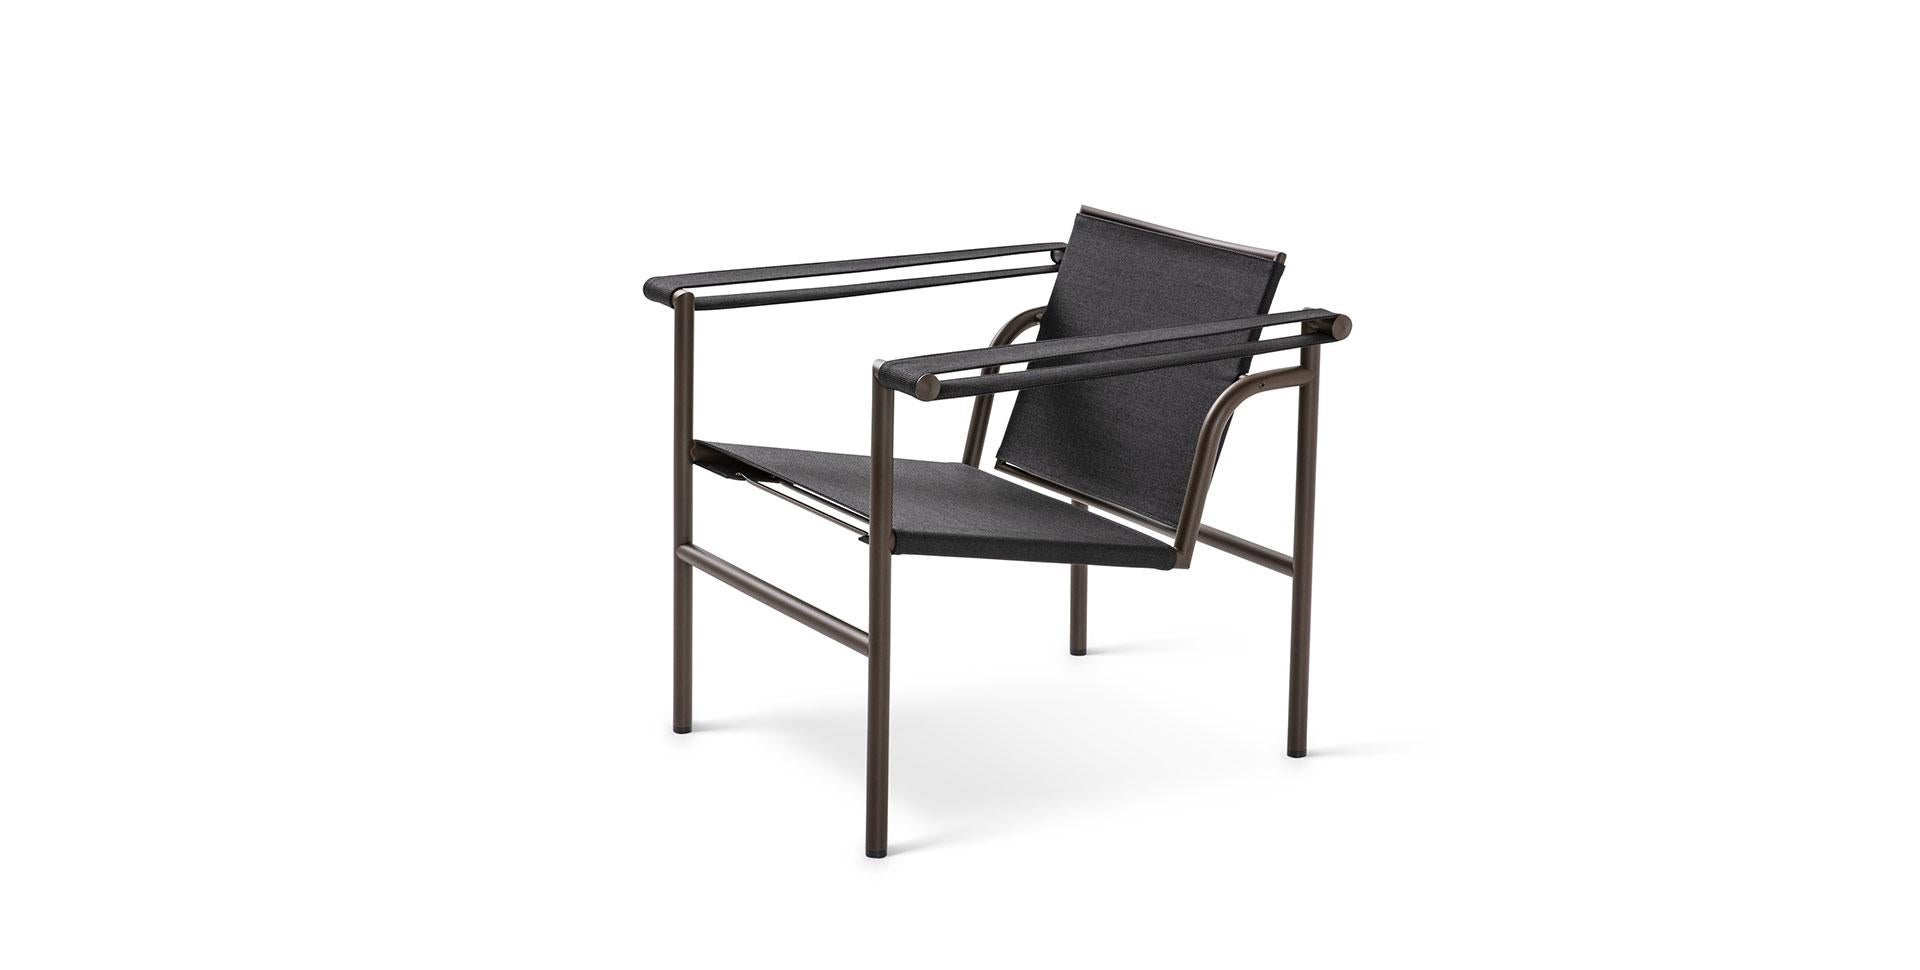 Chair designed by Le Corbusier, Pierre Jeanneret, Charlotte Perriand in 1928. Relaunched in 2019.
Manufactured by Cassina in Italy.

A light, compact chair designed and presented at the 1929 Salon d’Automne along with other important models, such as